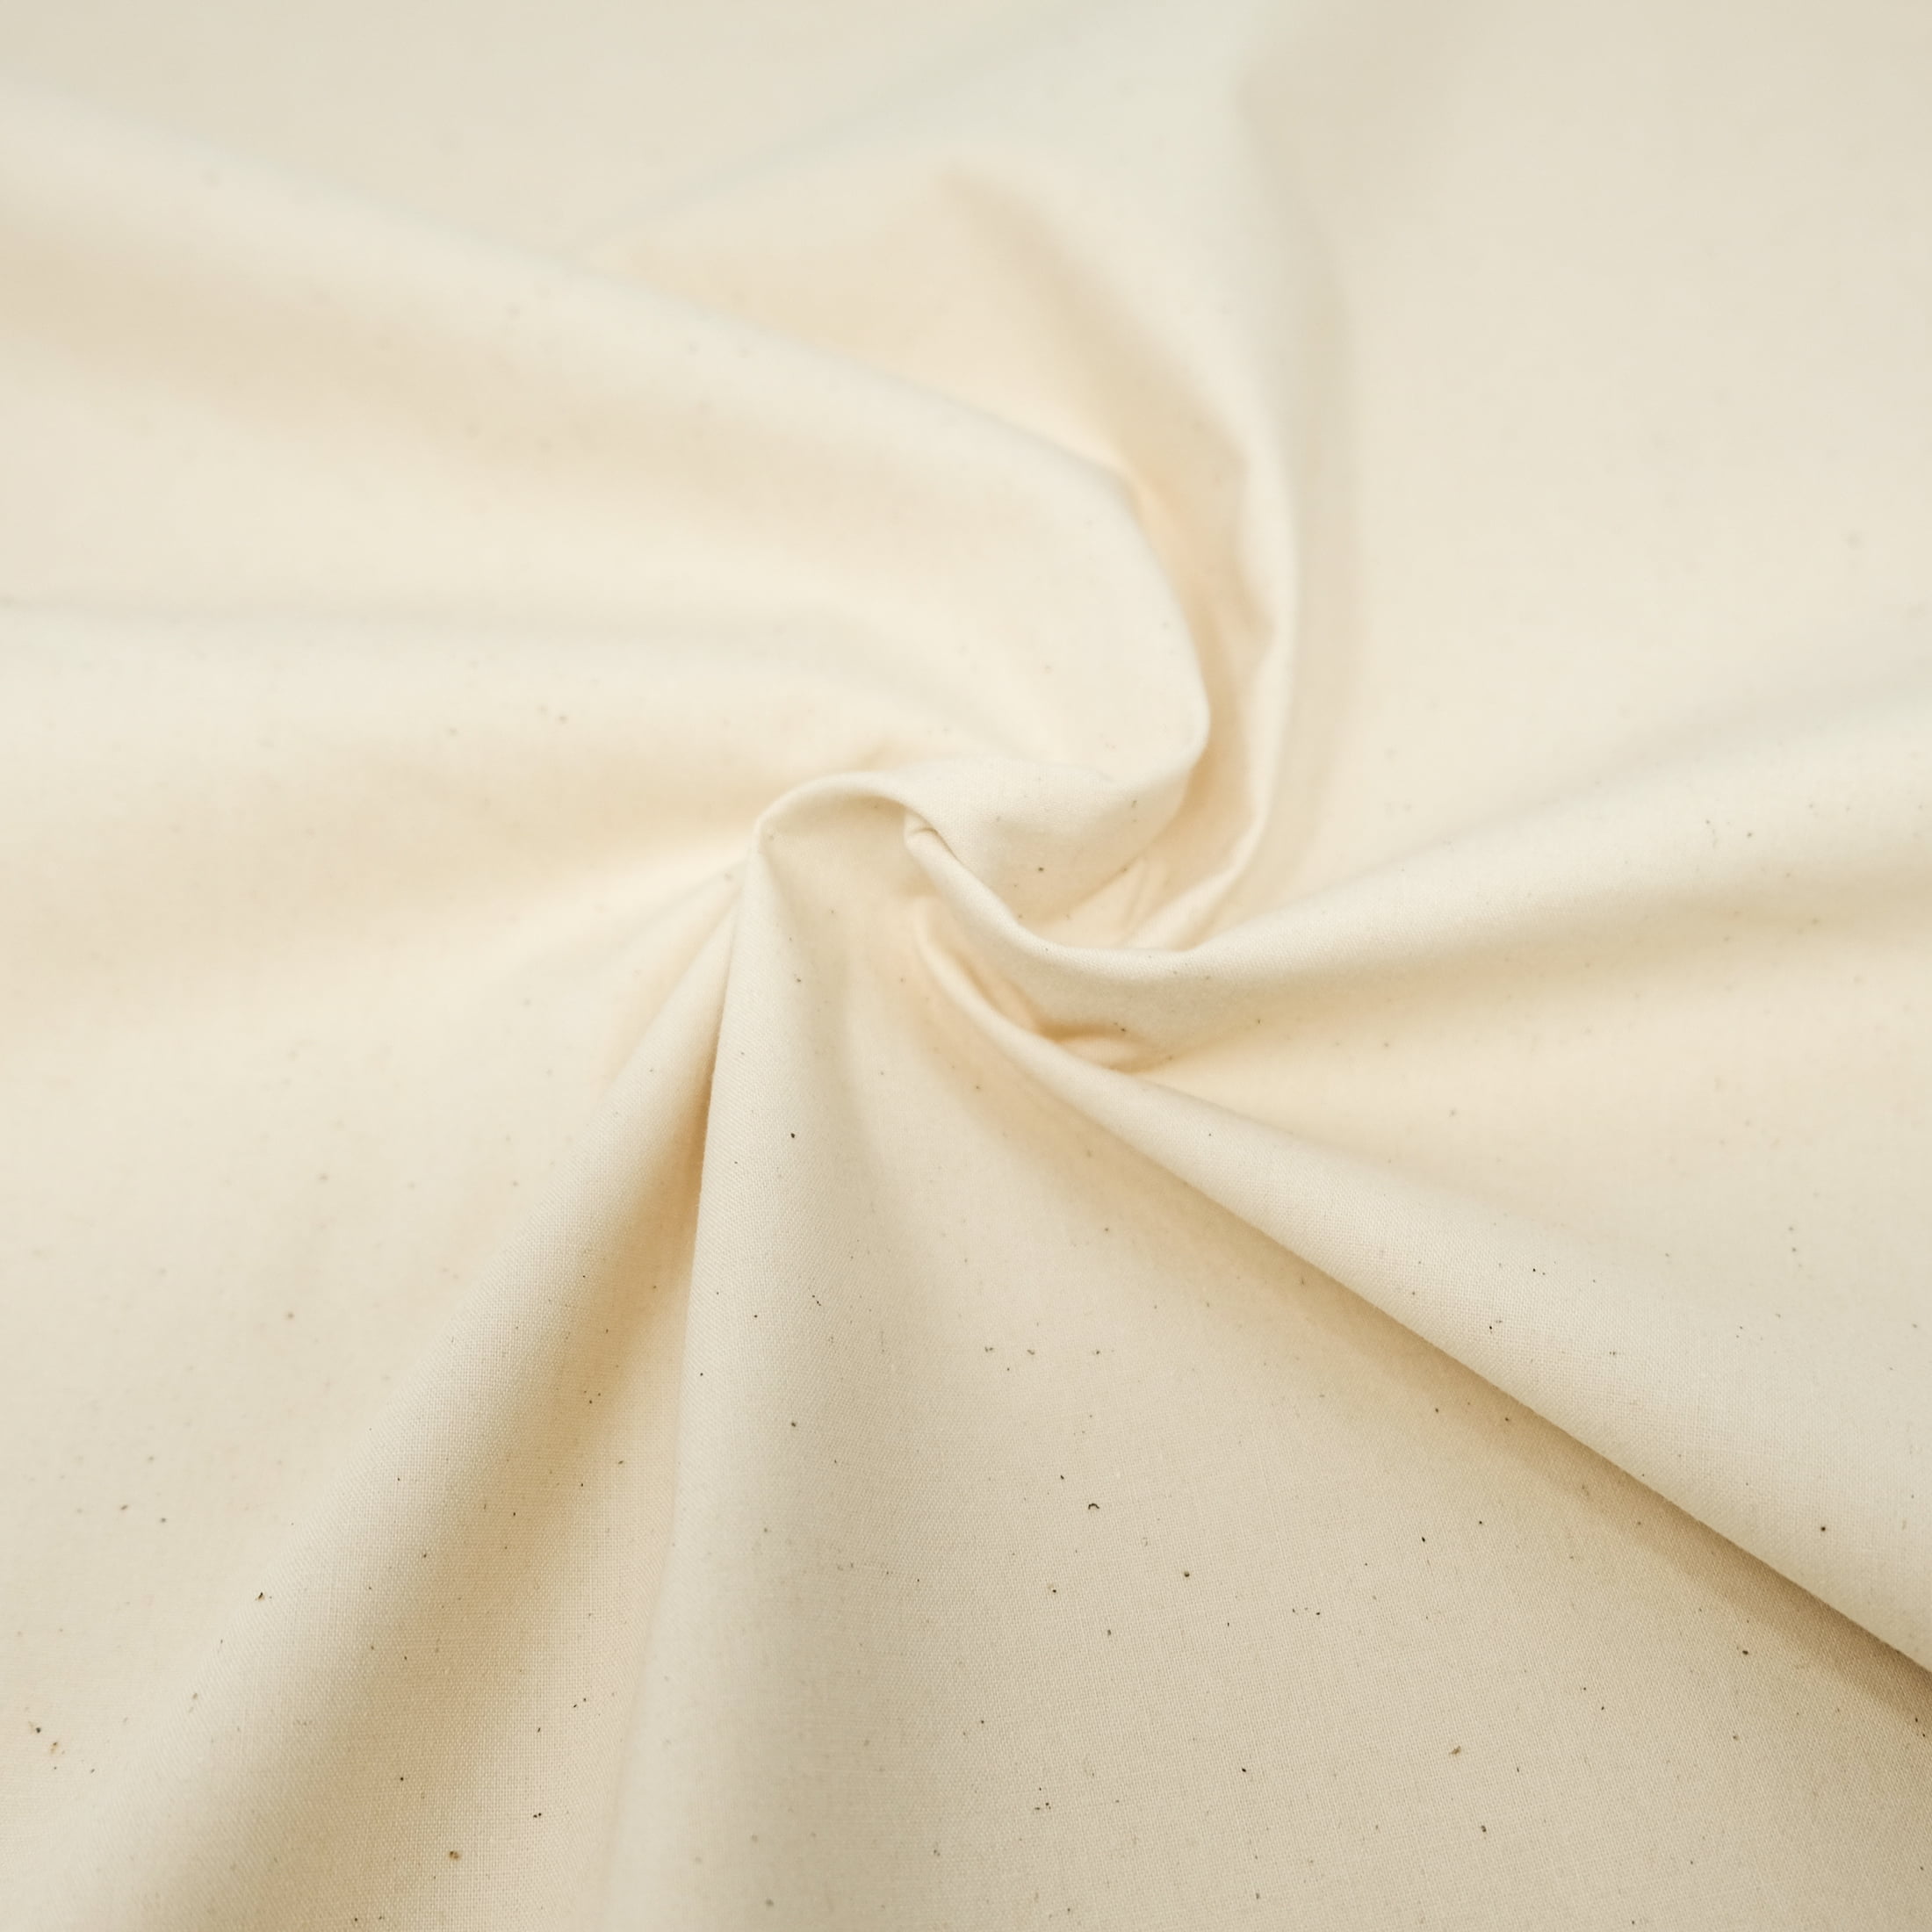 10 Yards Cotton Muslin Fabric Textile Unbleached Natural Cotton Fabric  Bleached or Unbleached Muslin Cloth 63 Inches Wide Muslin Roll Fabric  Backing